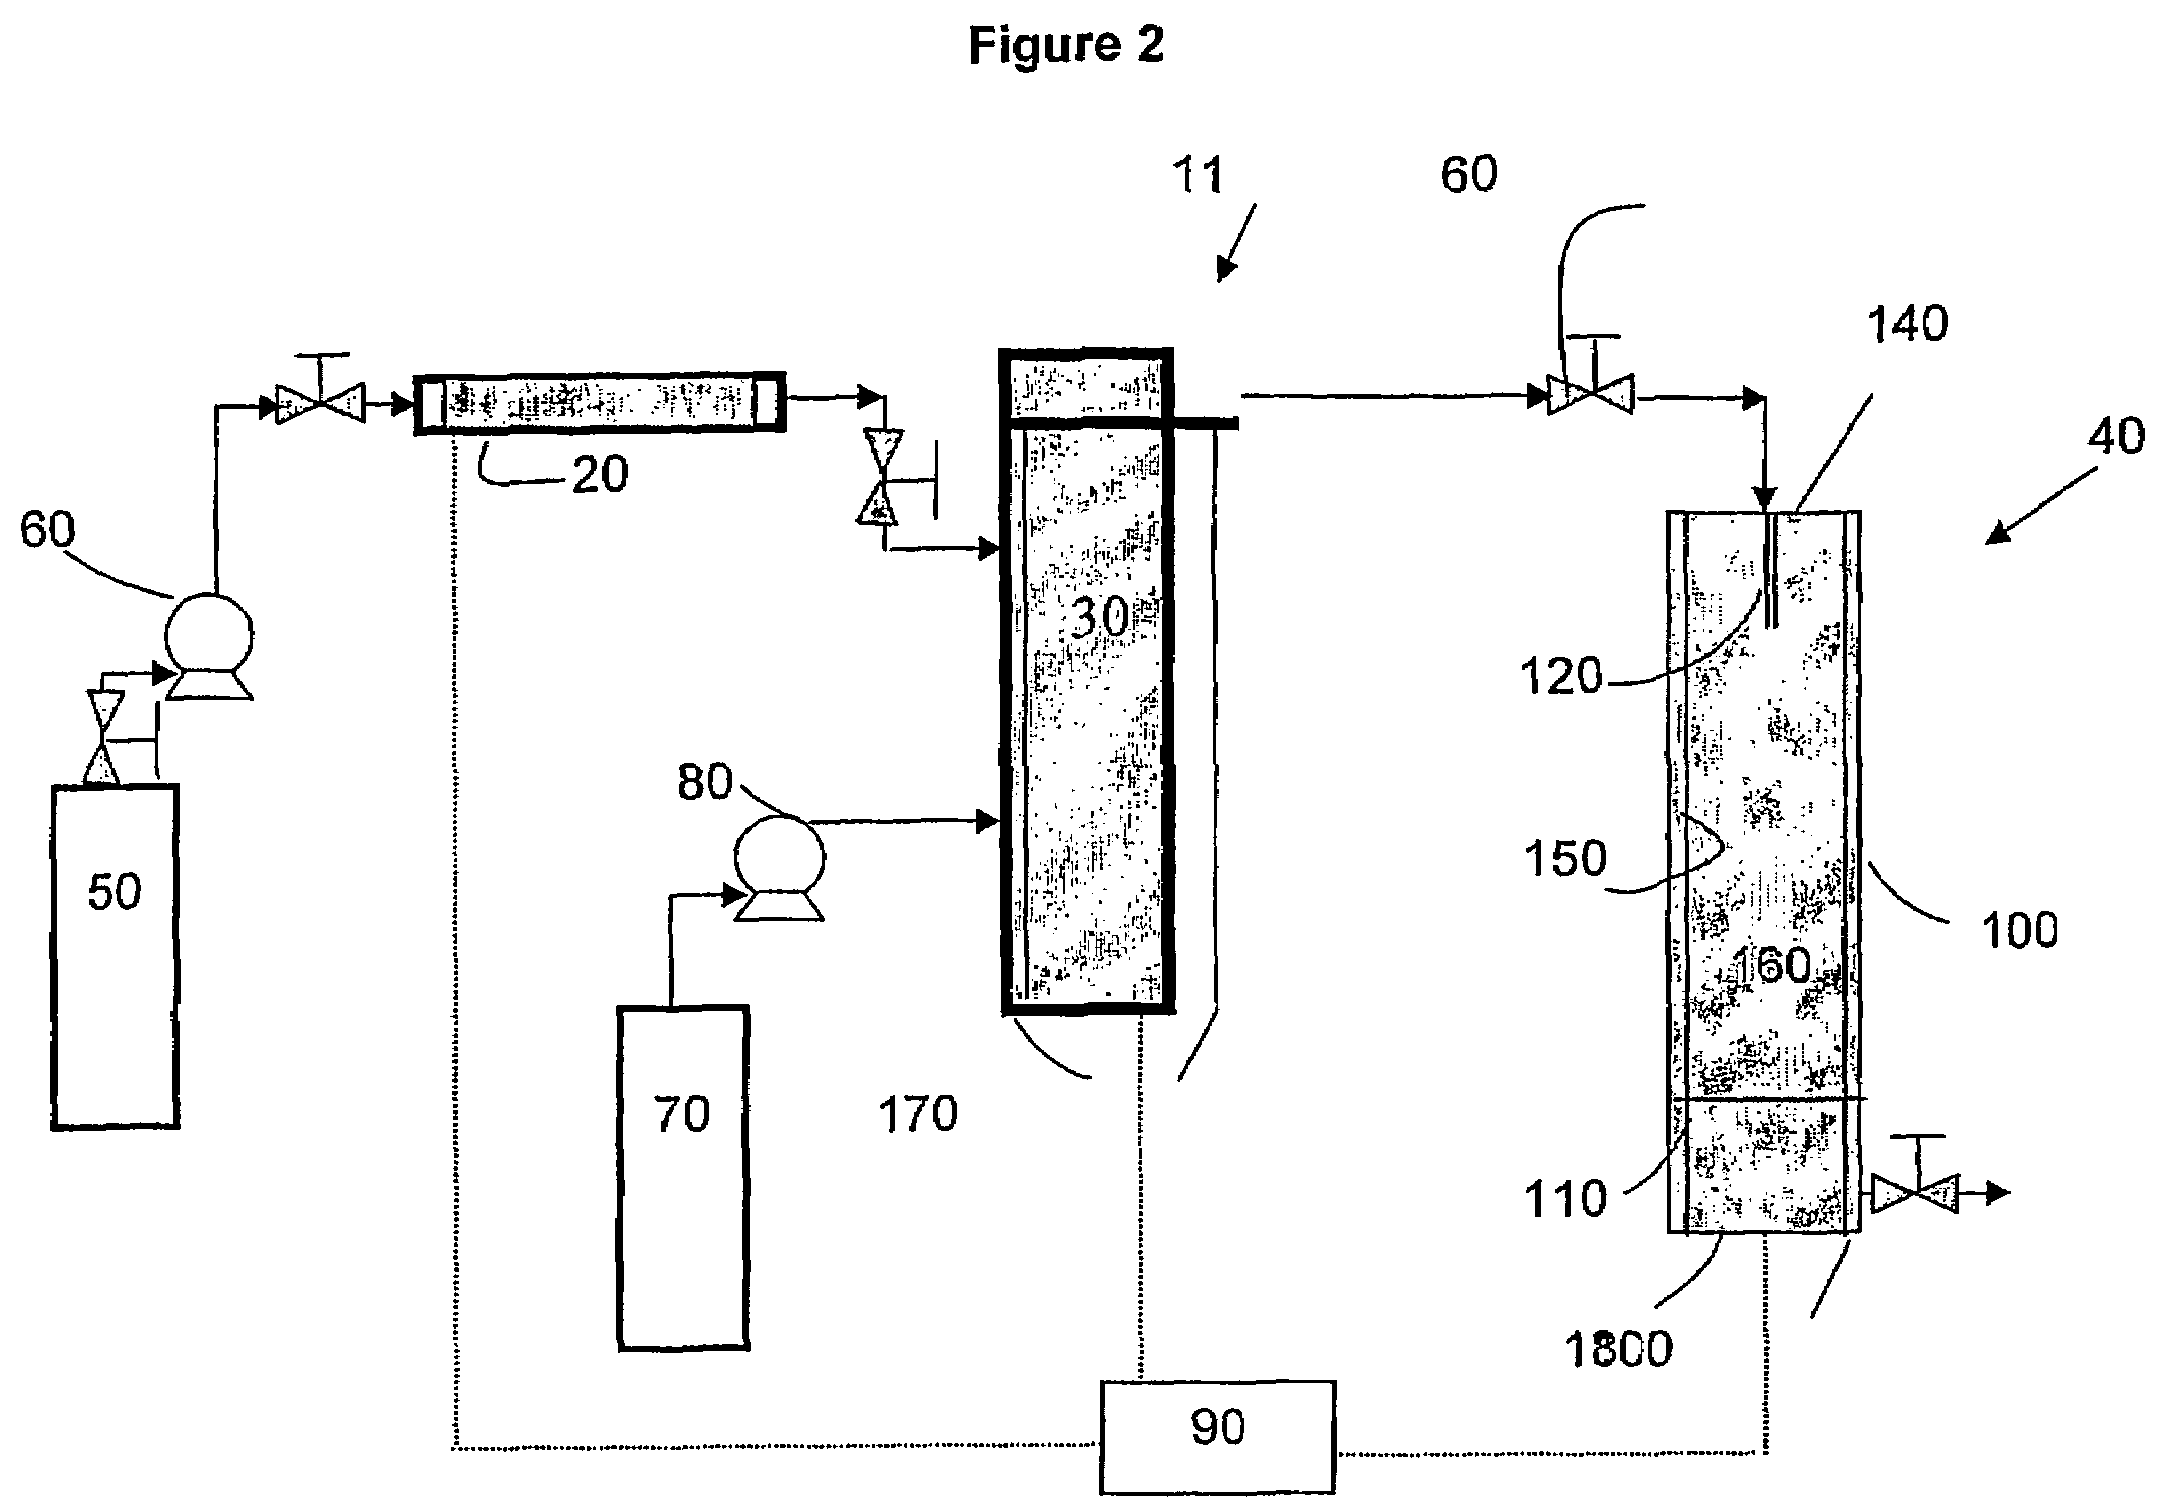 Method for preparation of particles from solution-in-supercritical fluid or compressed gas emulsions